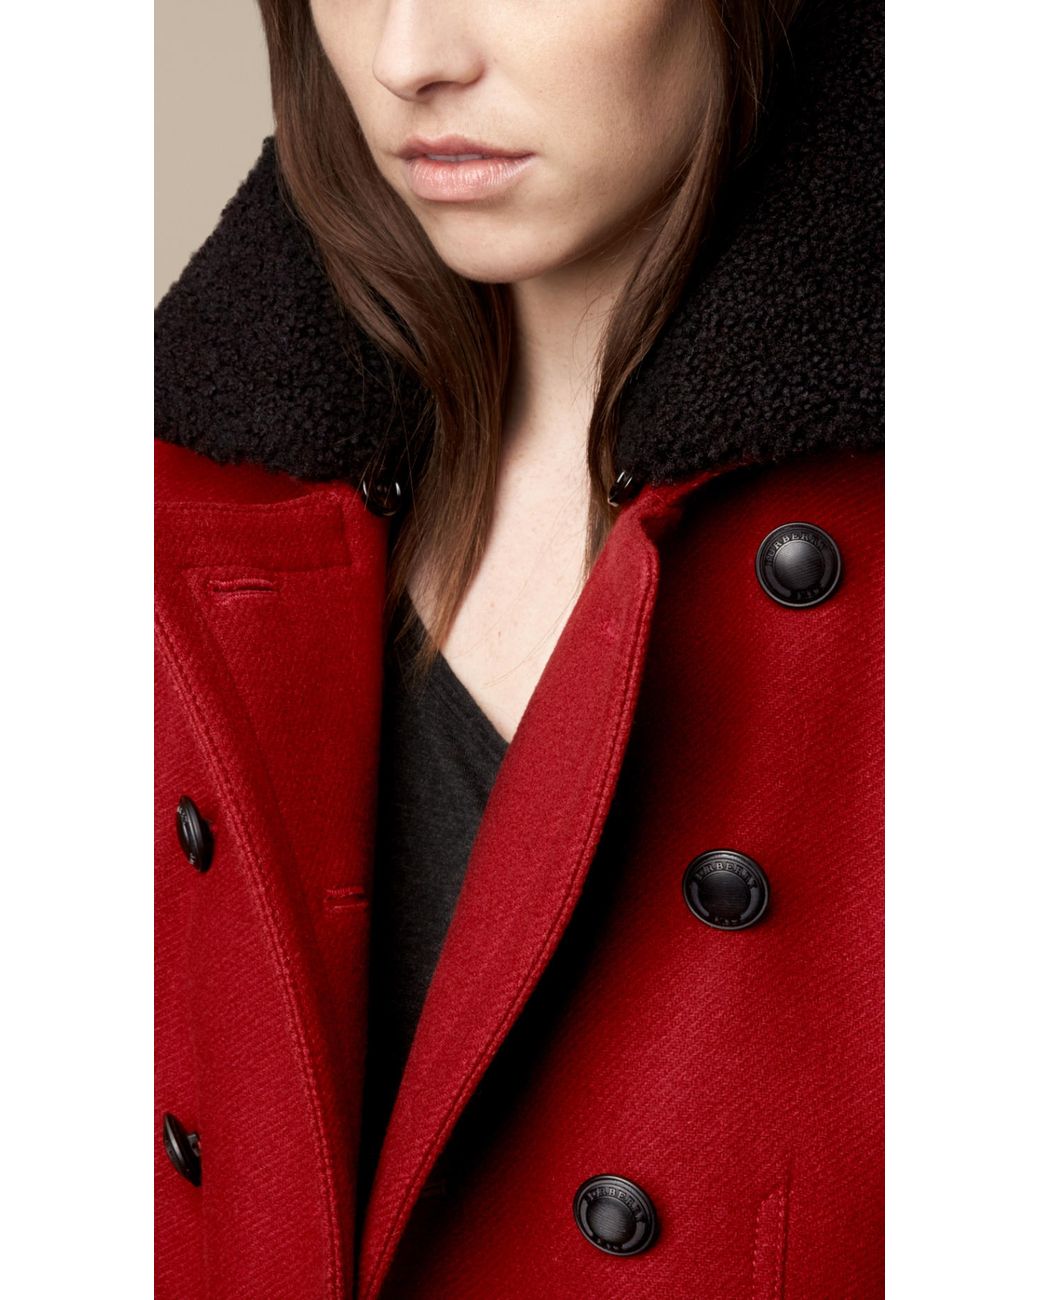 Burberry Shearling Collar Pea Coat in Red | Lyst UK